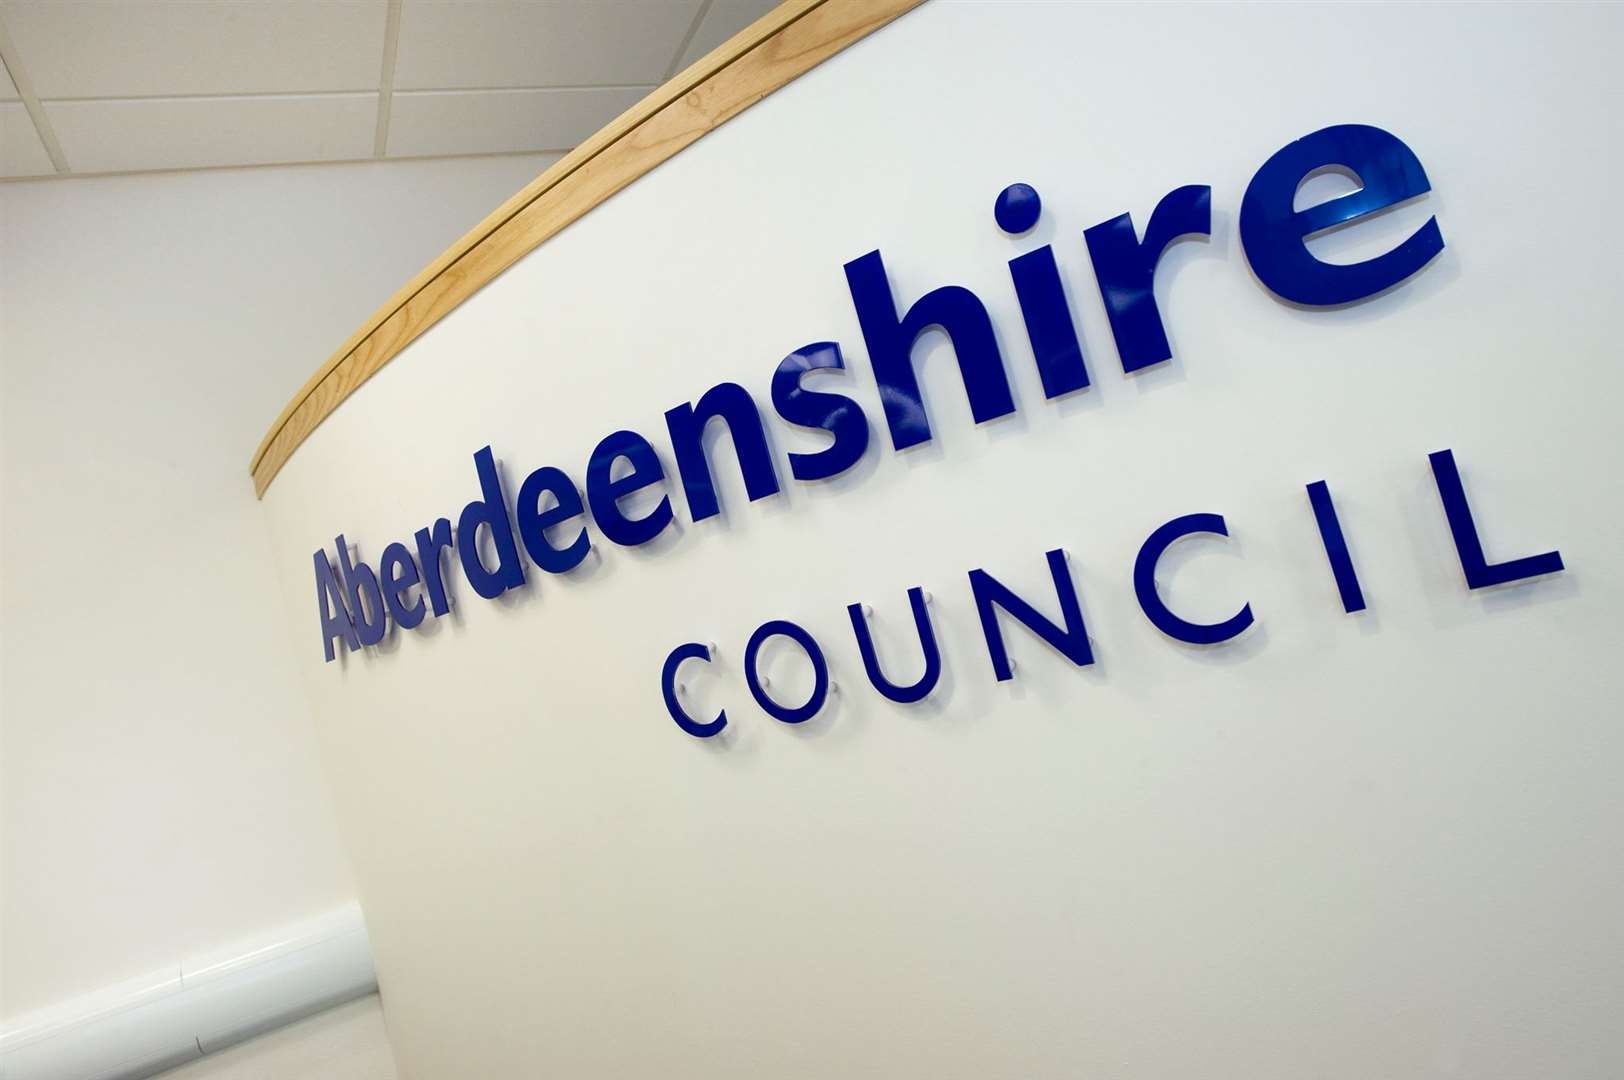 The Marr area committee of Aberdeenshire Council agreed the new funds.